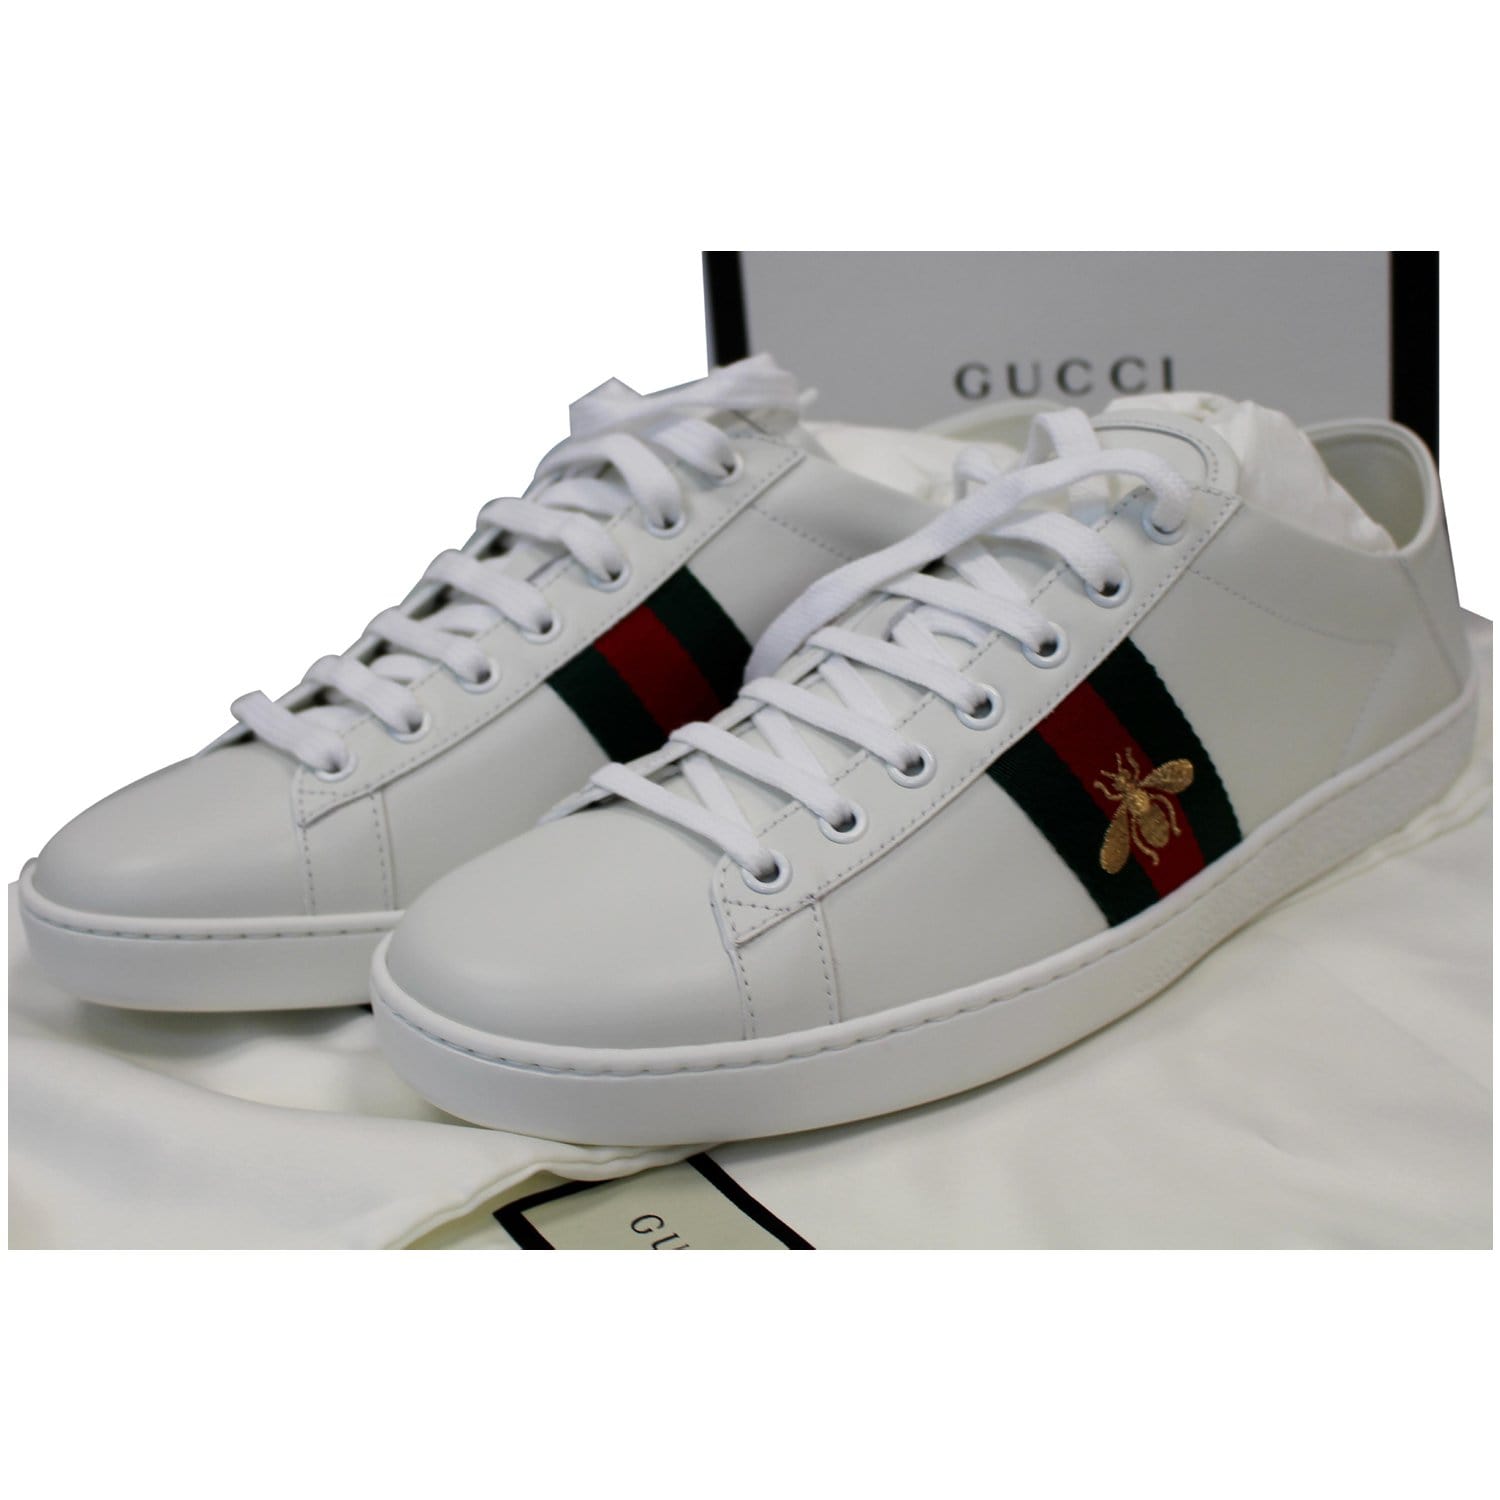 Gucci Ace Classic Low Top Sneakers - White